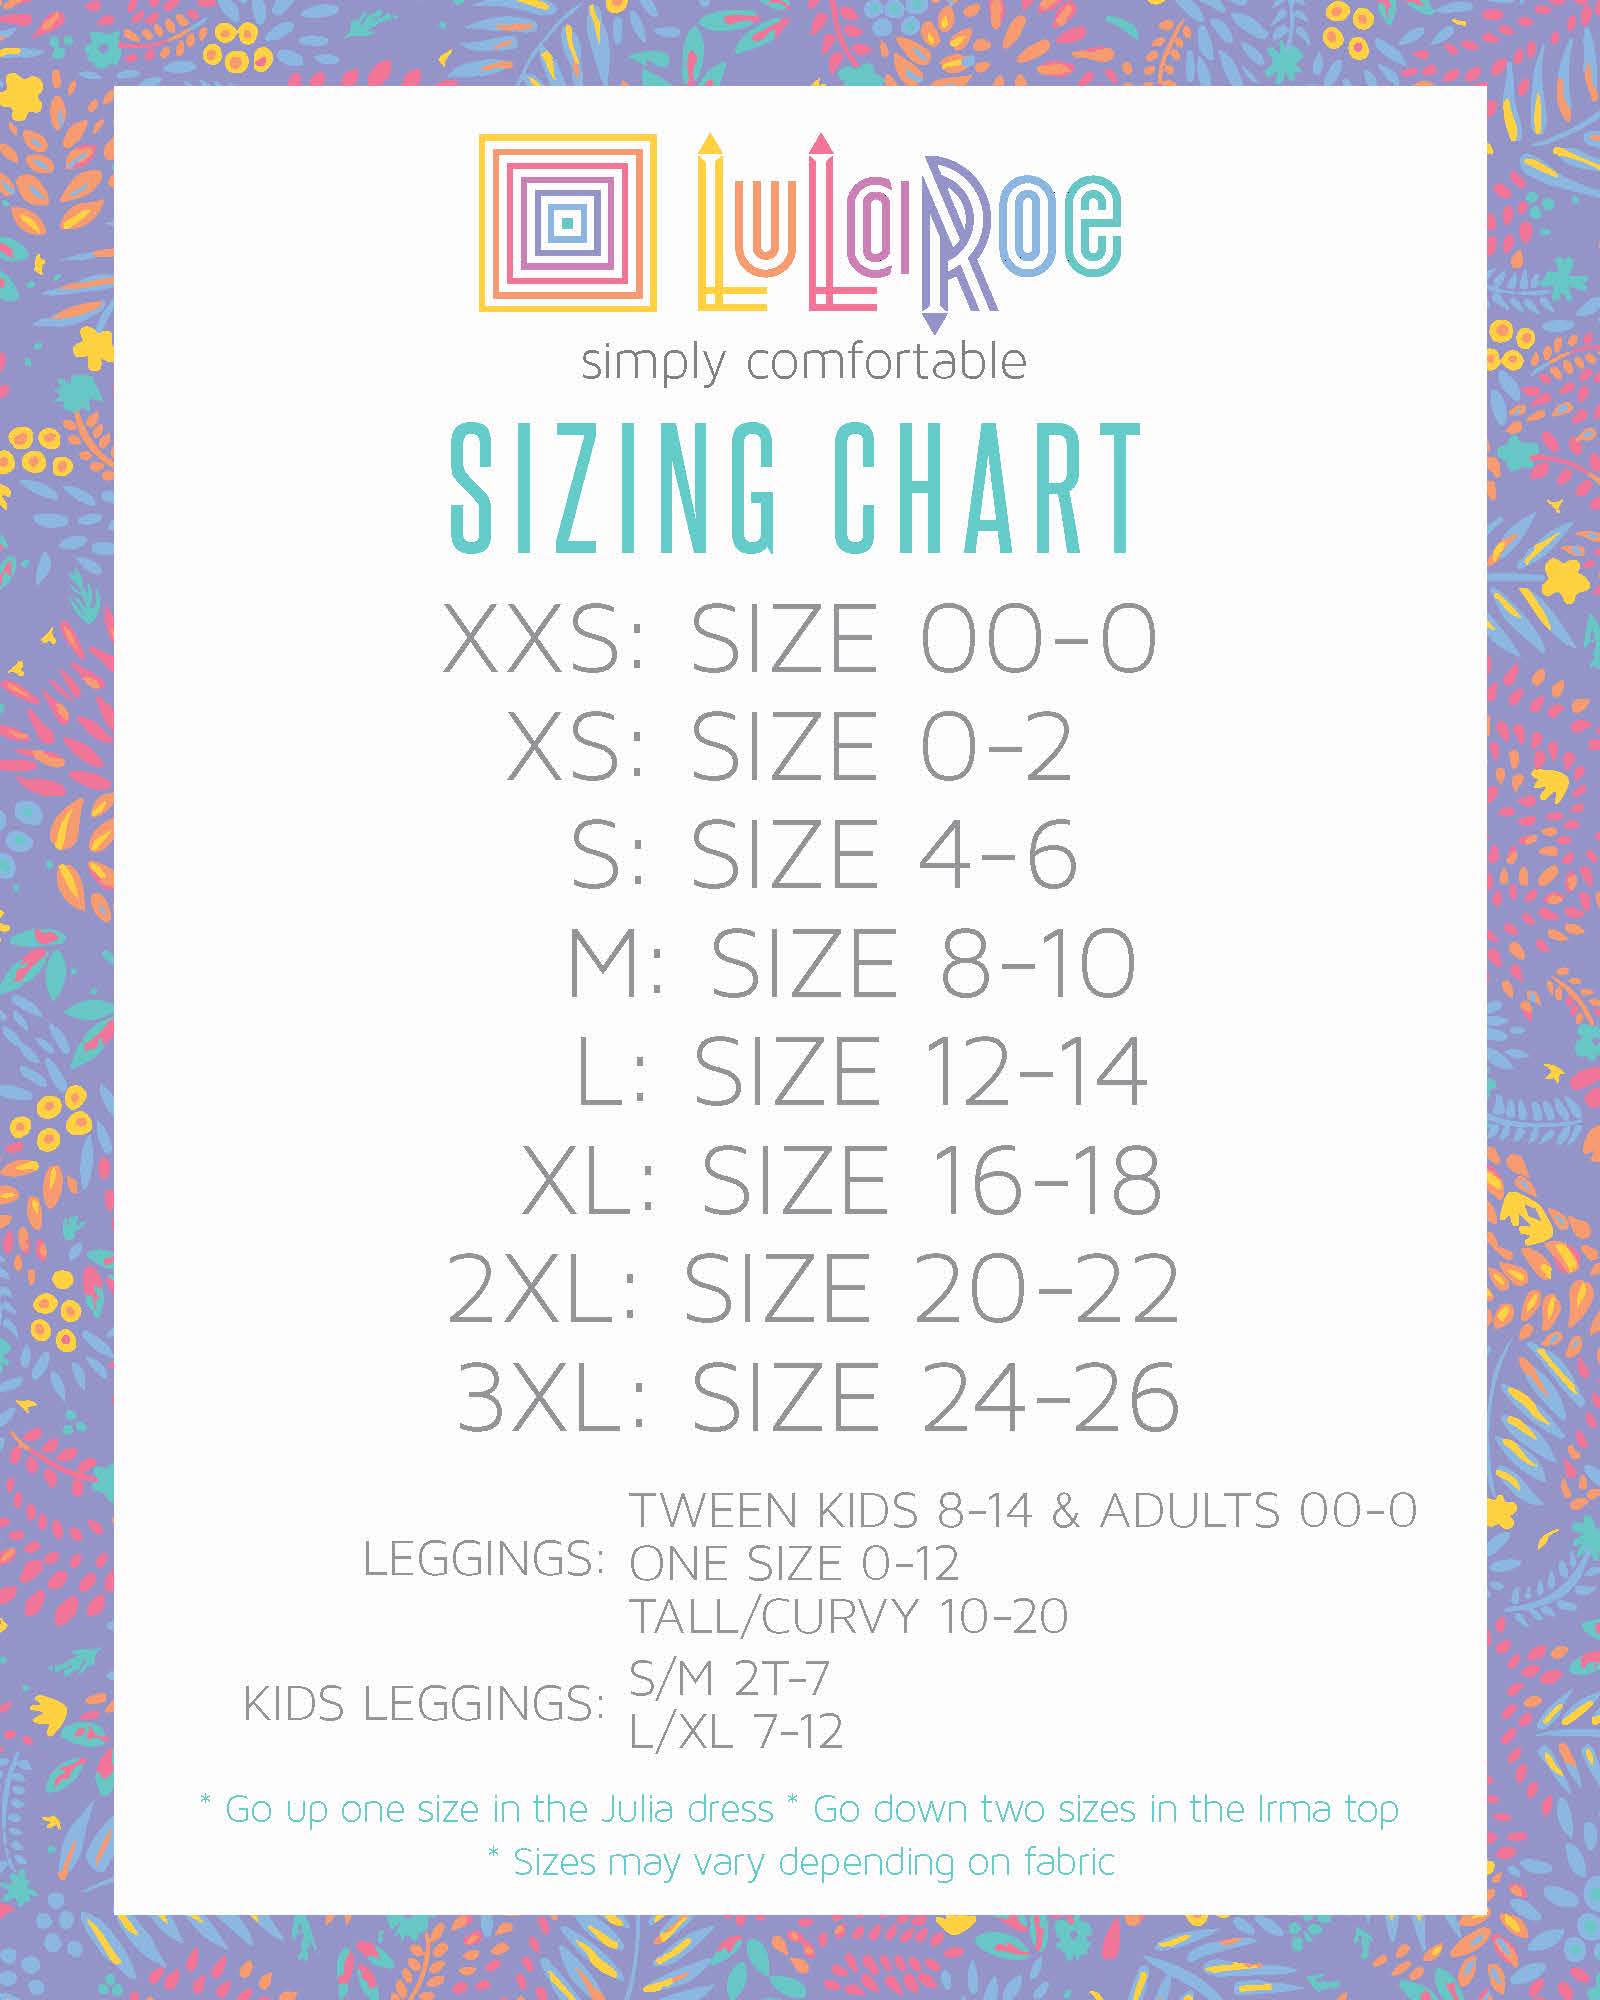 uying and Selling LuLaRoe as a Reseller